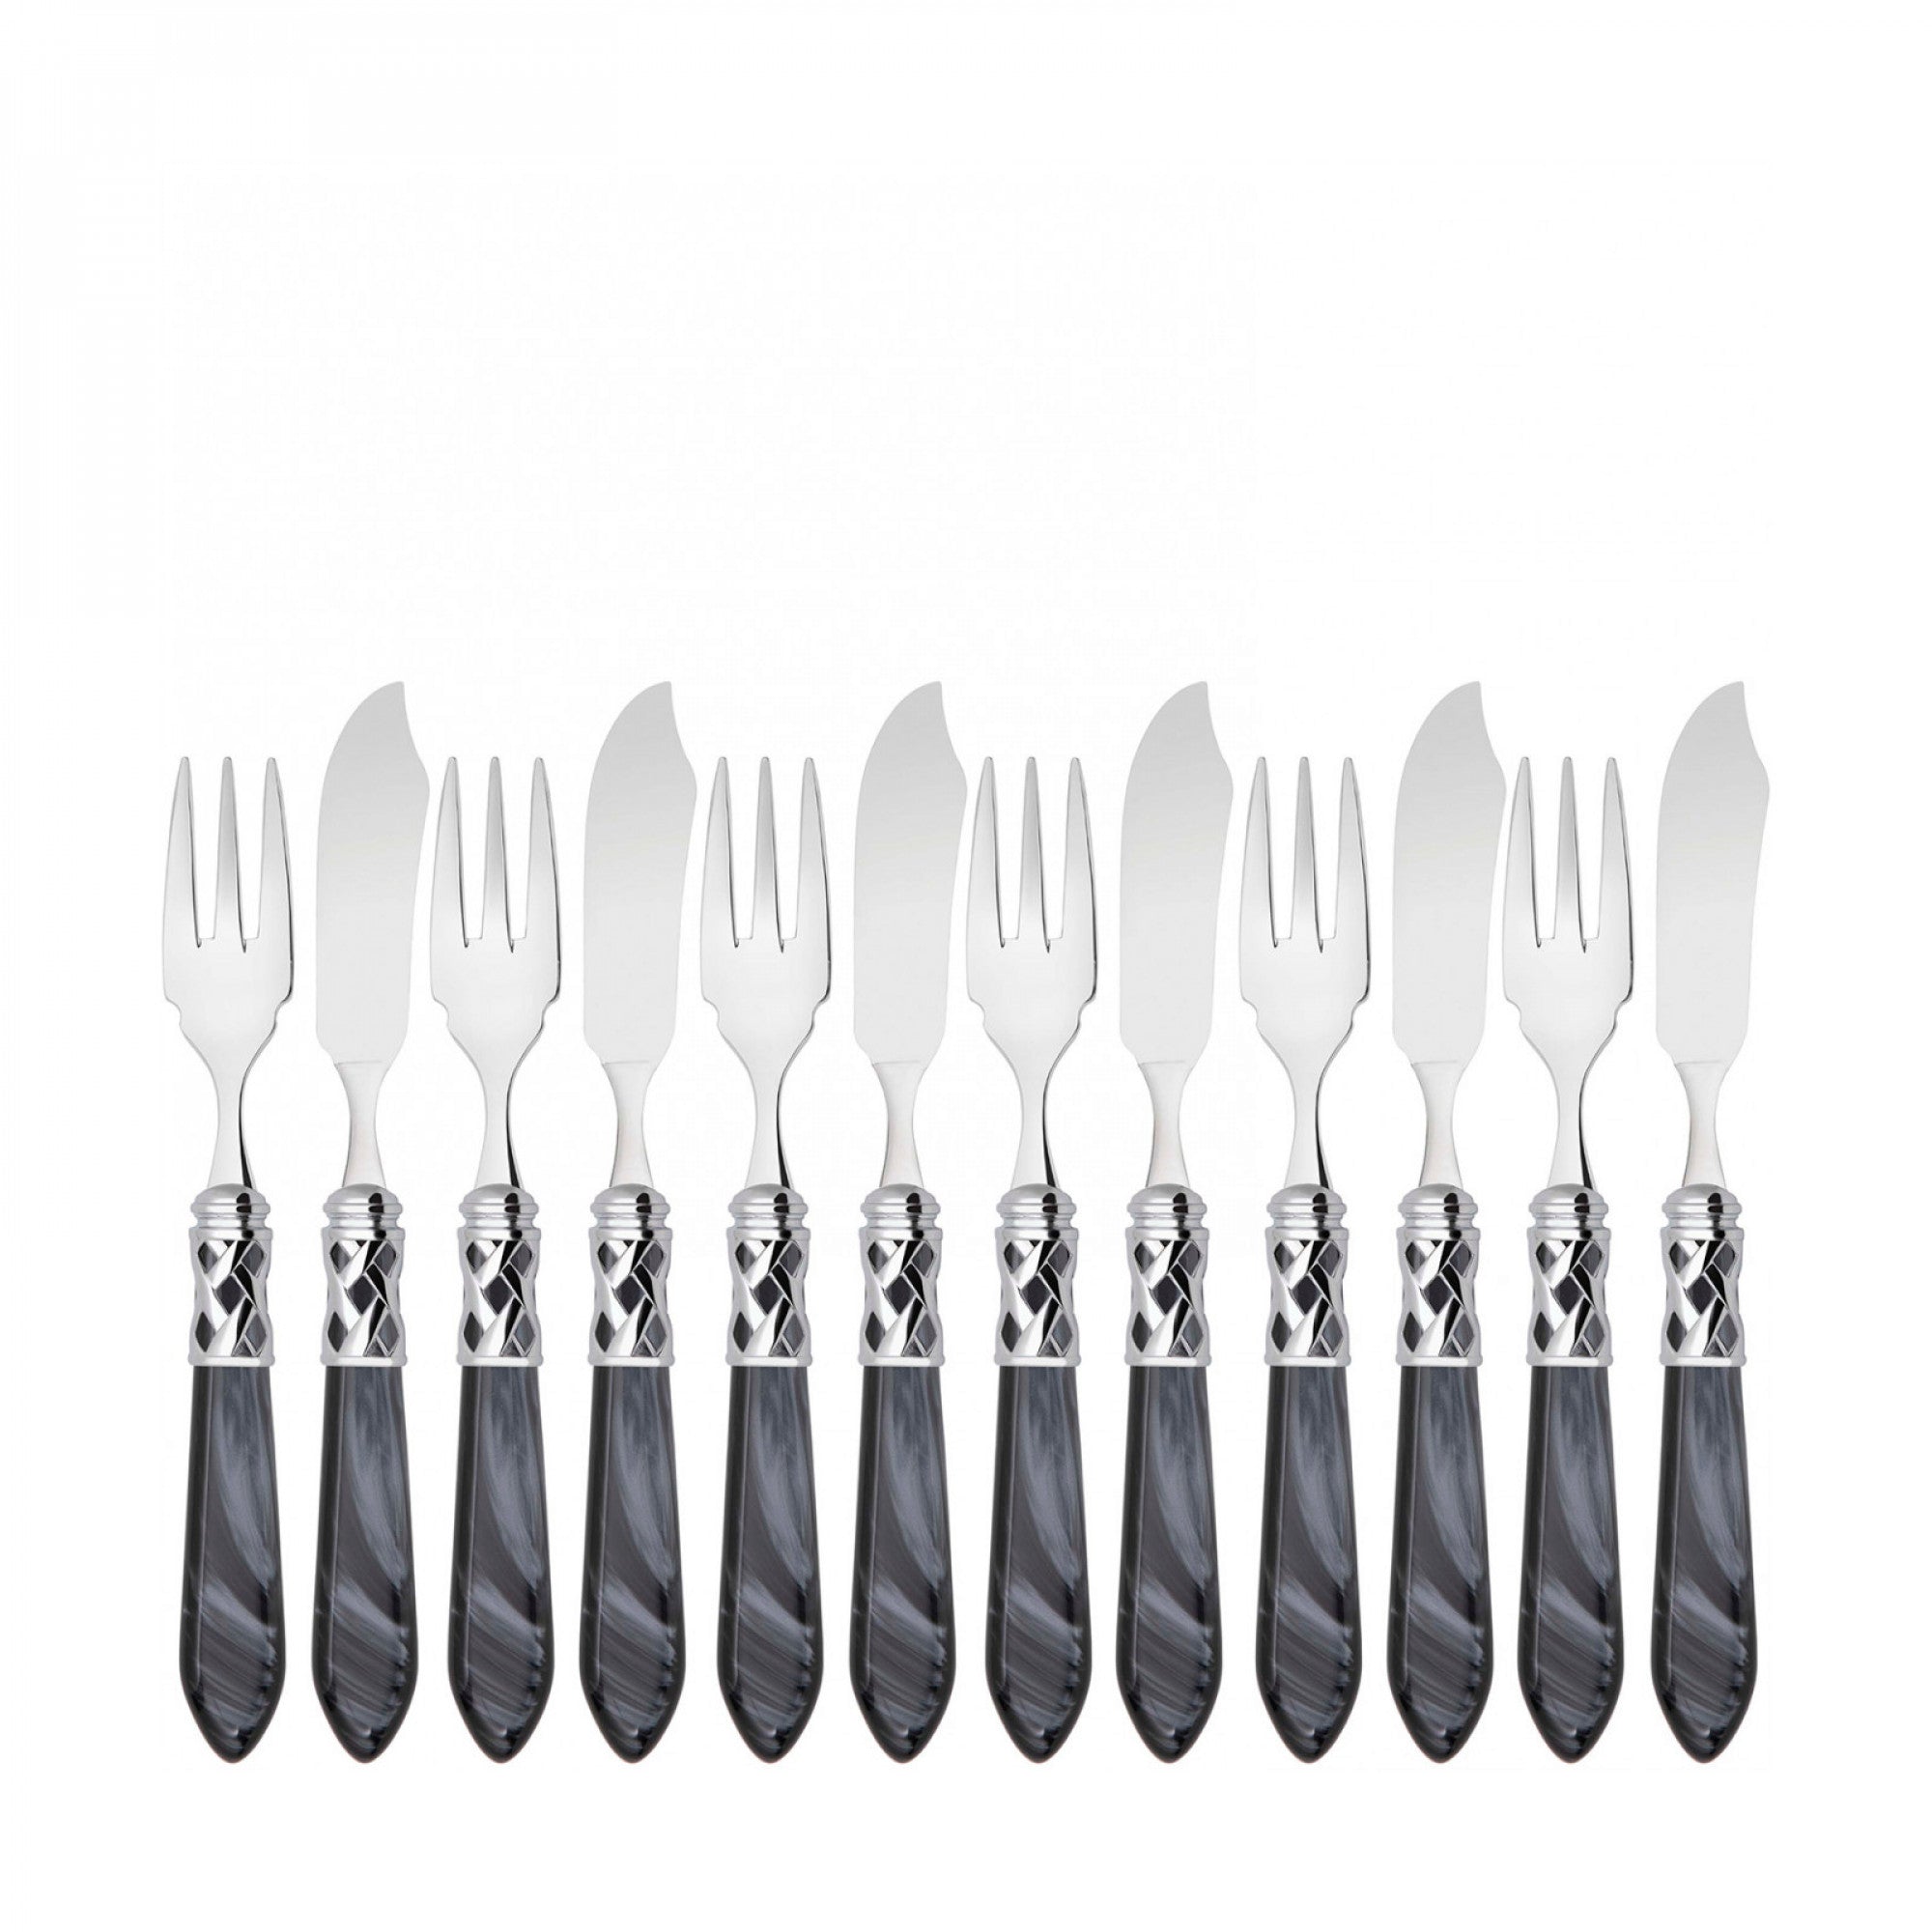 BUGATTI, Aladdin, 12-piece fish cutlery set in 18/10 stainless steel, chromed ring and mother-of-pearl effect handle